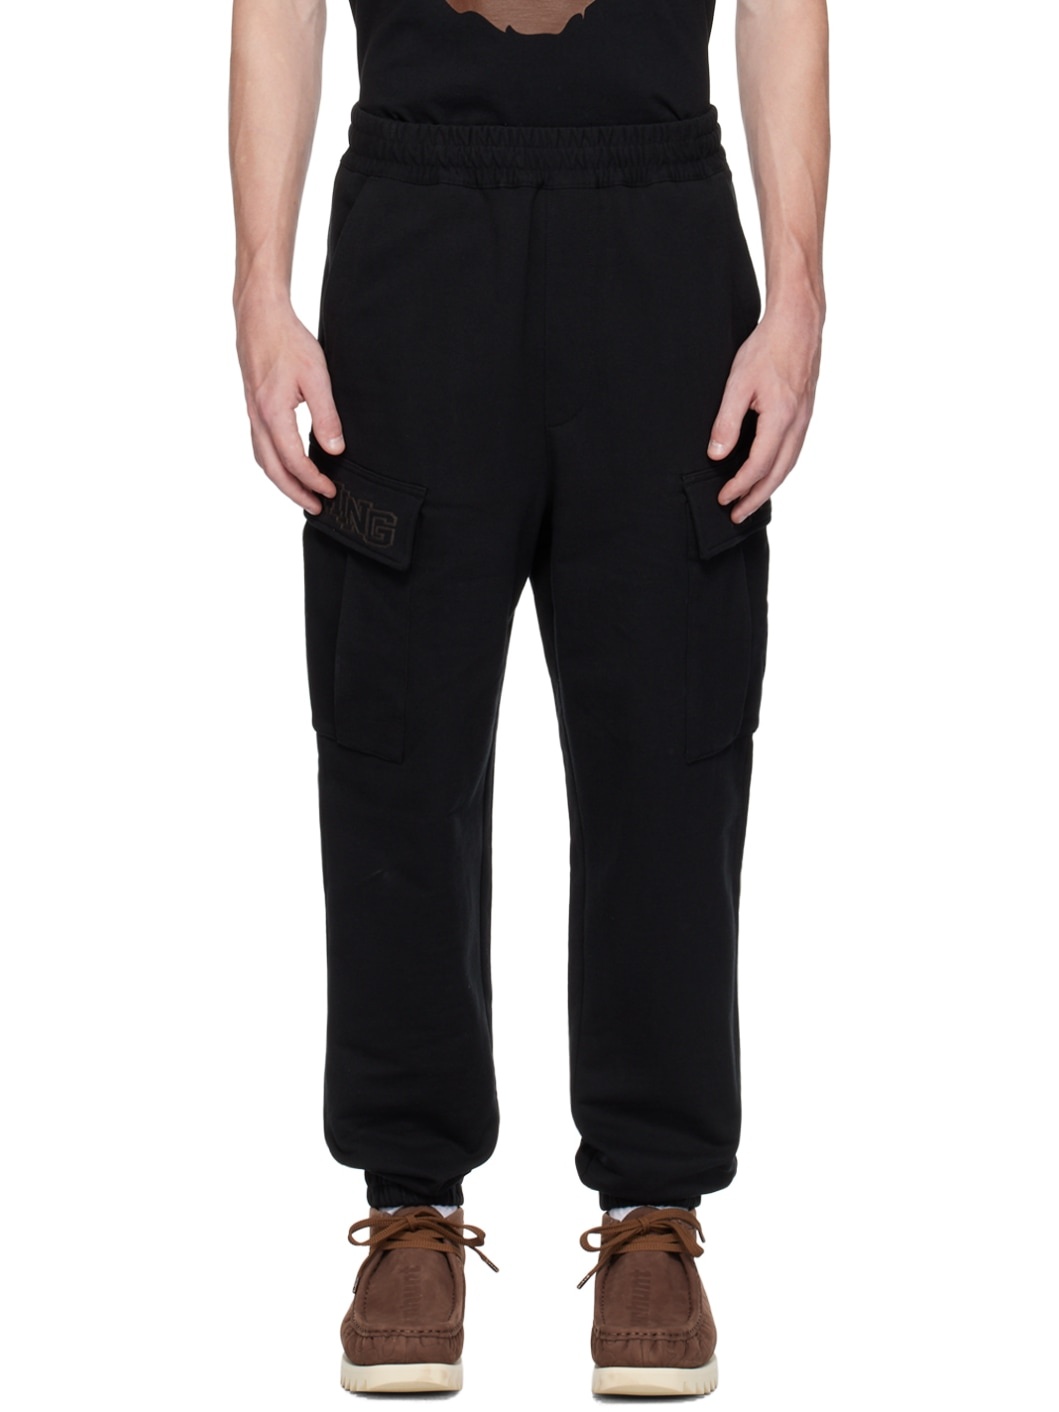 Black Relaxed Fit Cargo Pants - 1